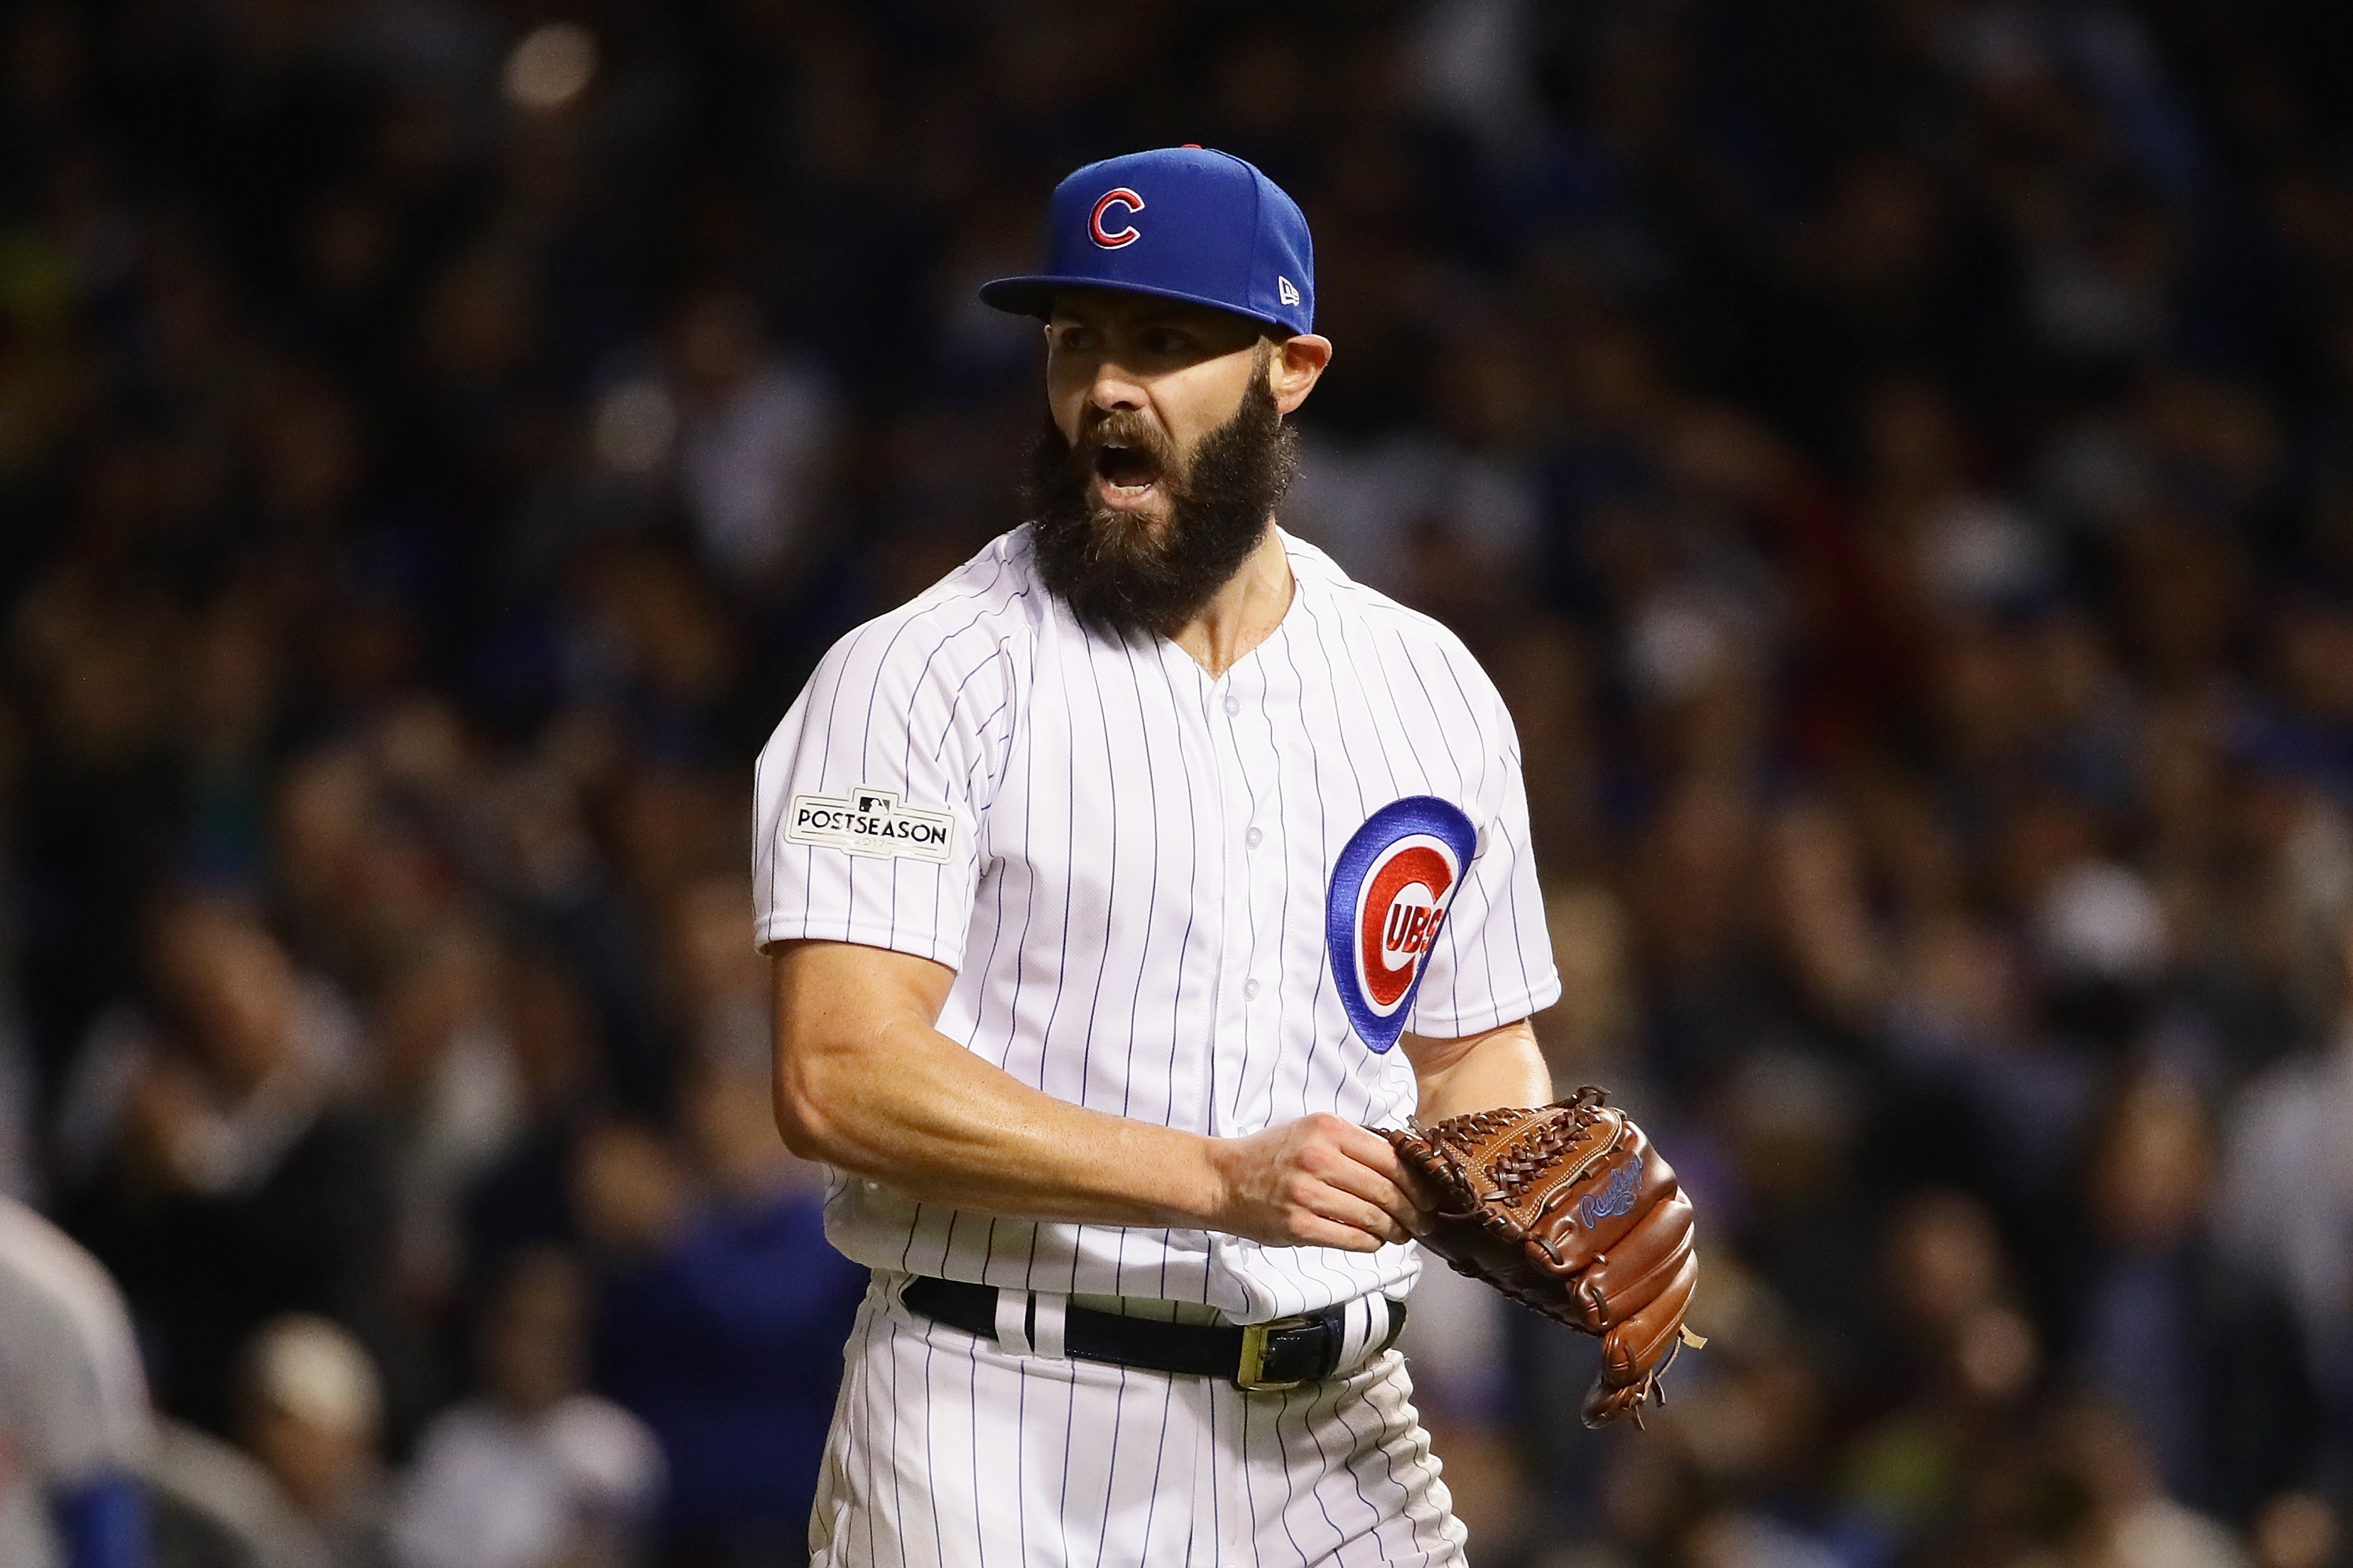 Toronto Blue Jays: The case for and against Jake Arrieta